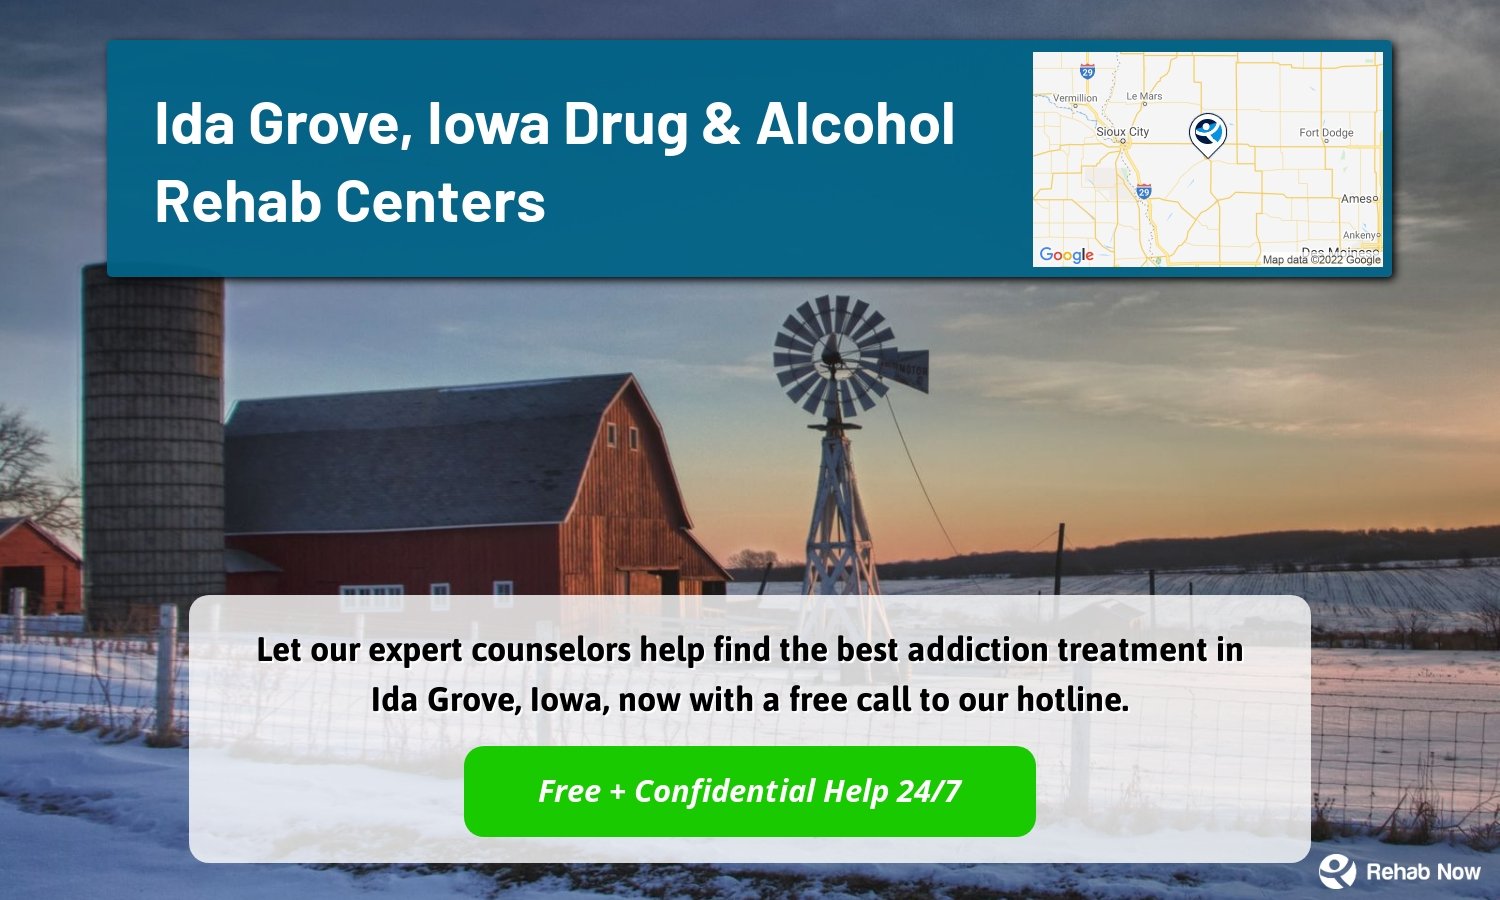 Let our expert counselors help find the best addiction treatment in Ida Grove, Iowa, now with a free call to our hotline.